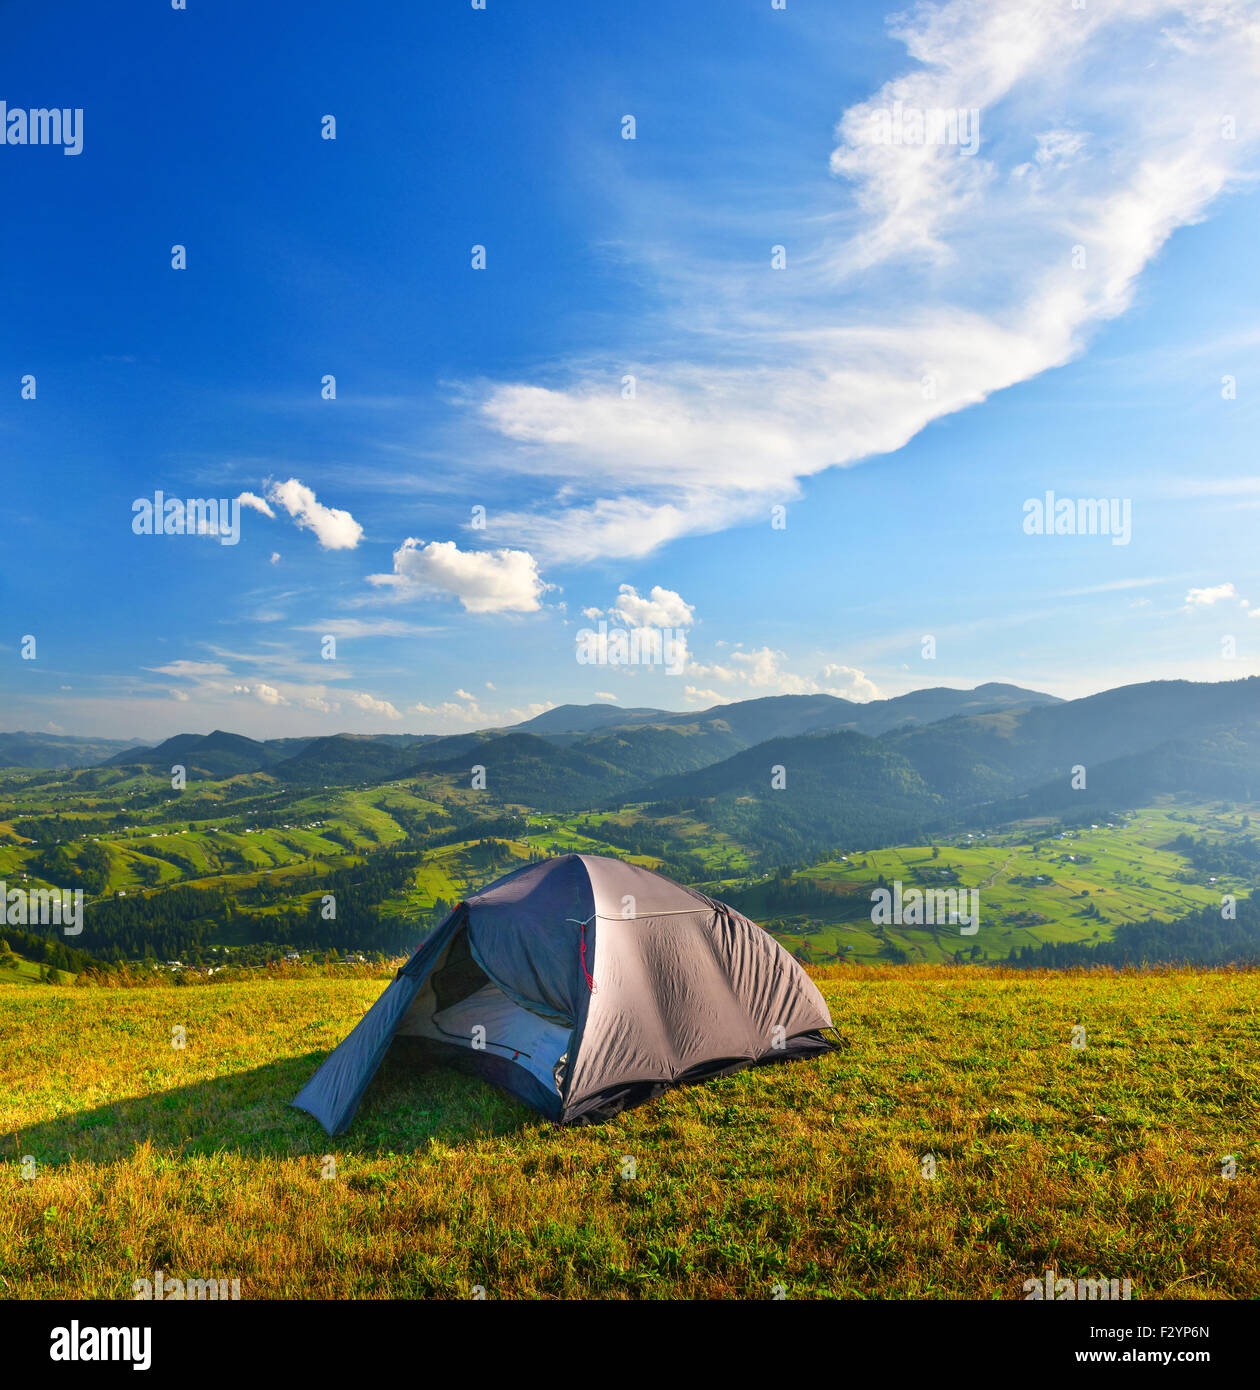 Tourist tent in the summer mountains. Stock Photo